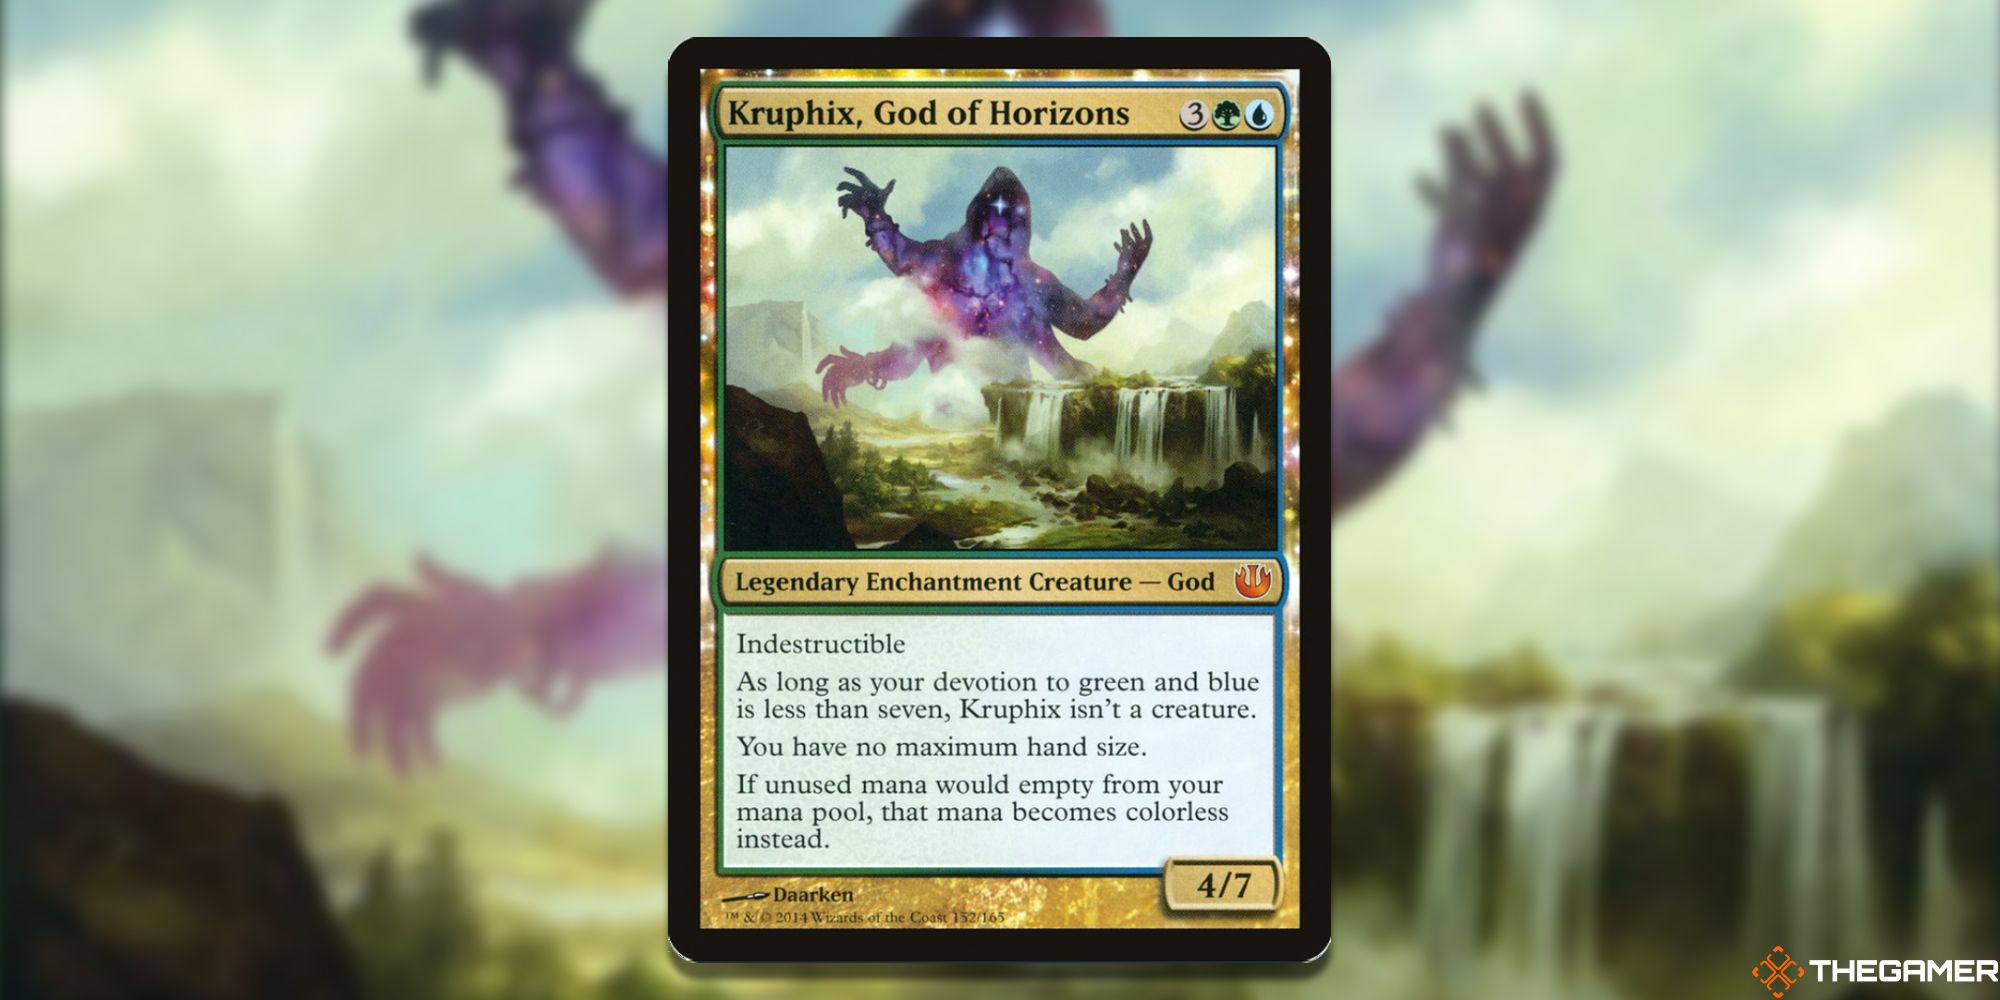 Image of the Kruphix, God of Horizons card in Magic: The Gathering, with art by Daarken